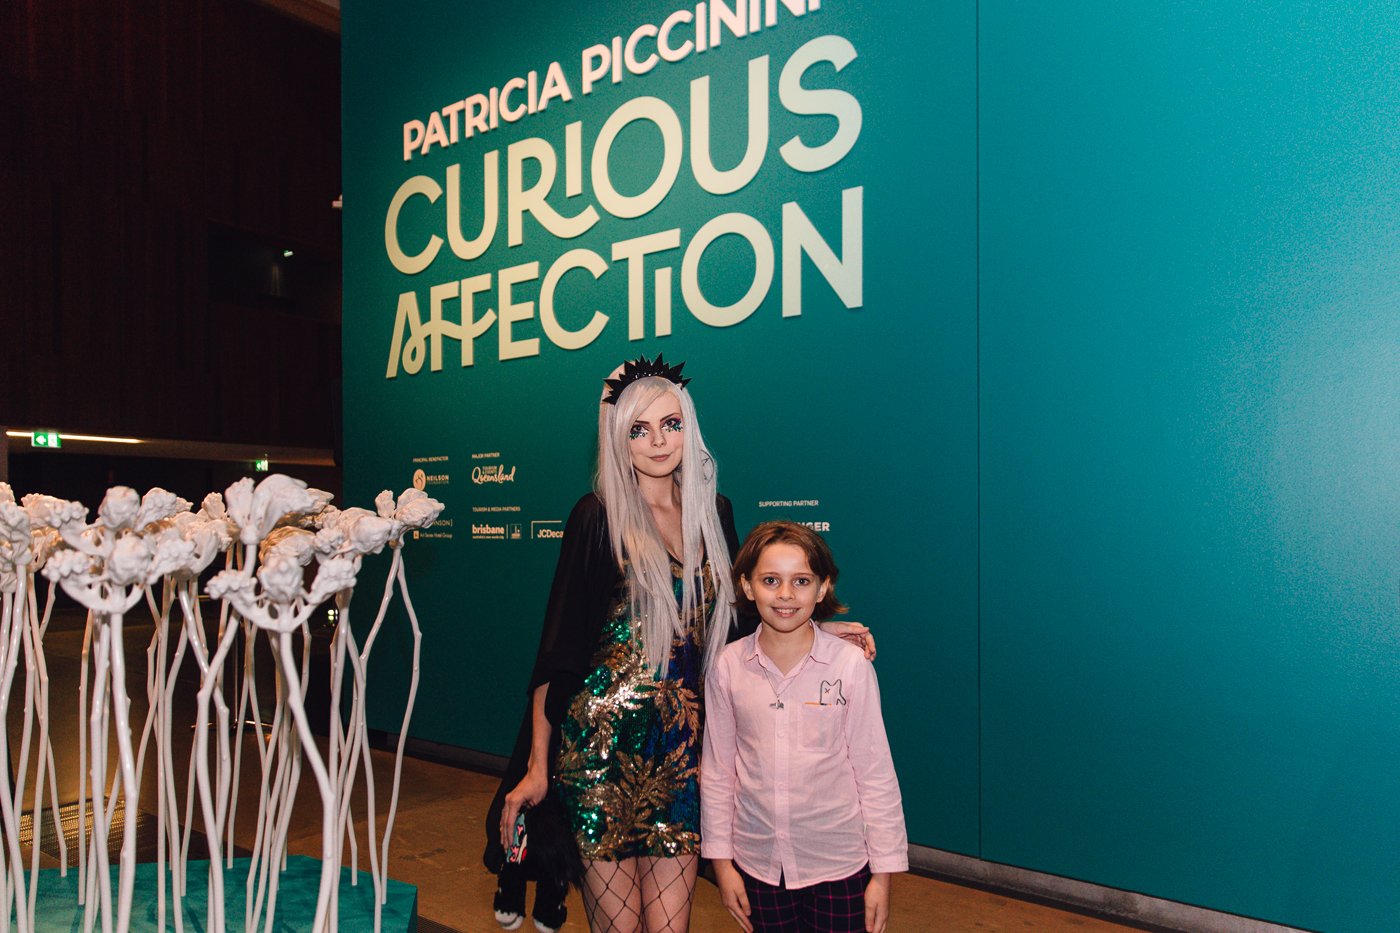 Patricia Piccinini: Curious Affection Opening Night